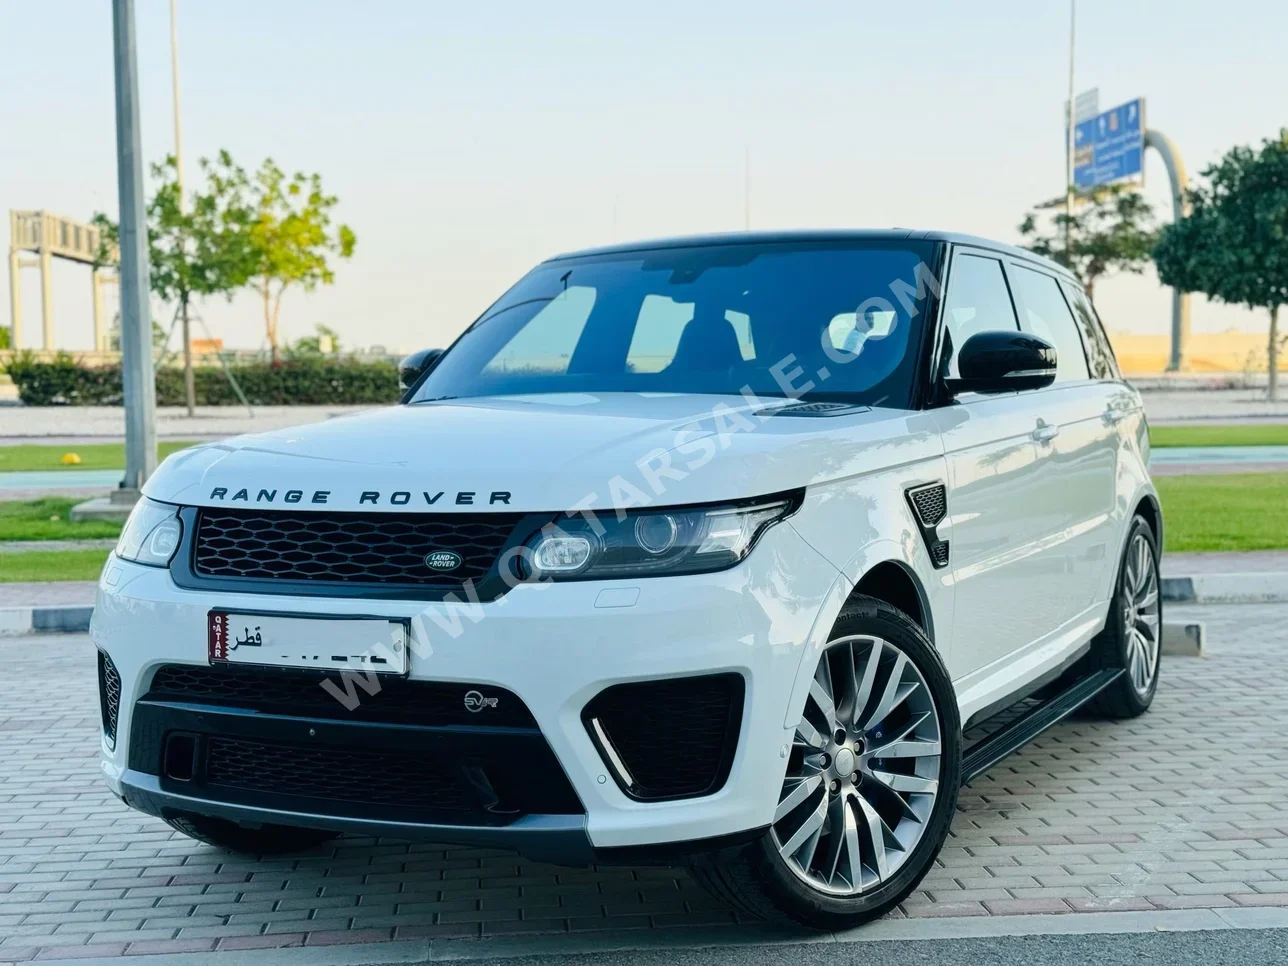 Land Rover  Range Rover  Sport SVR  2016  Automatic  112,000 Km  8 Cylinder  Four Wheel Drive (4WD)  SUV  White